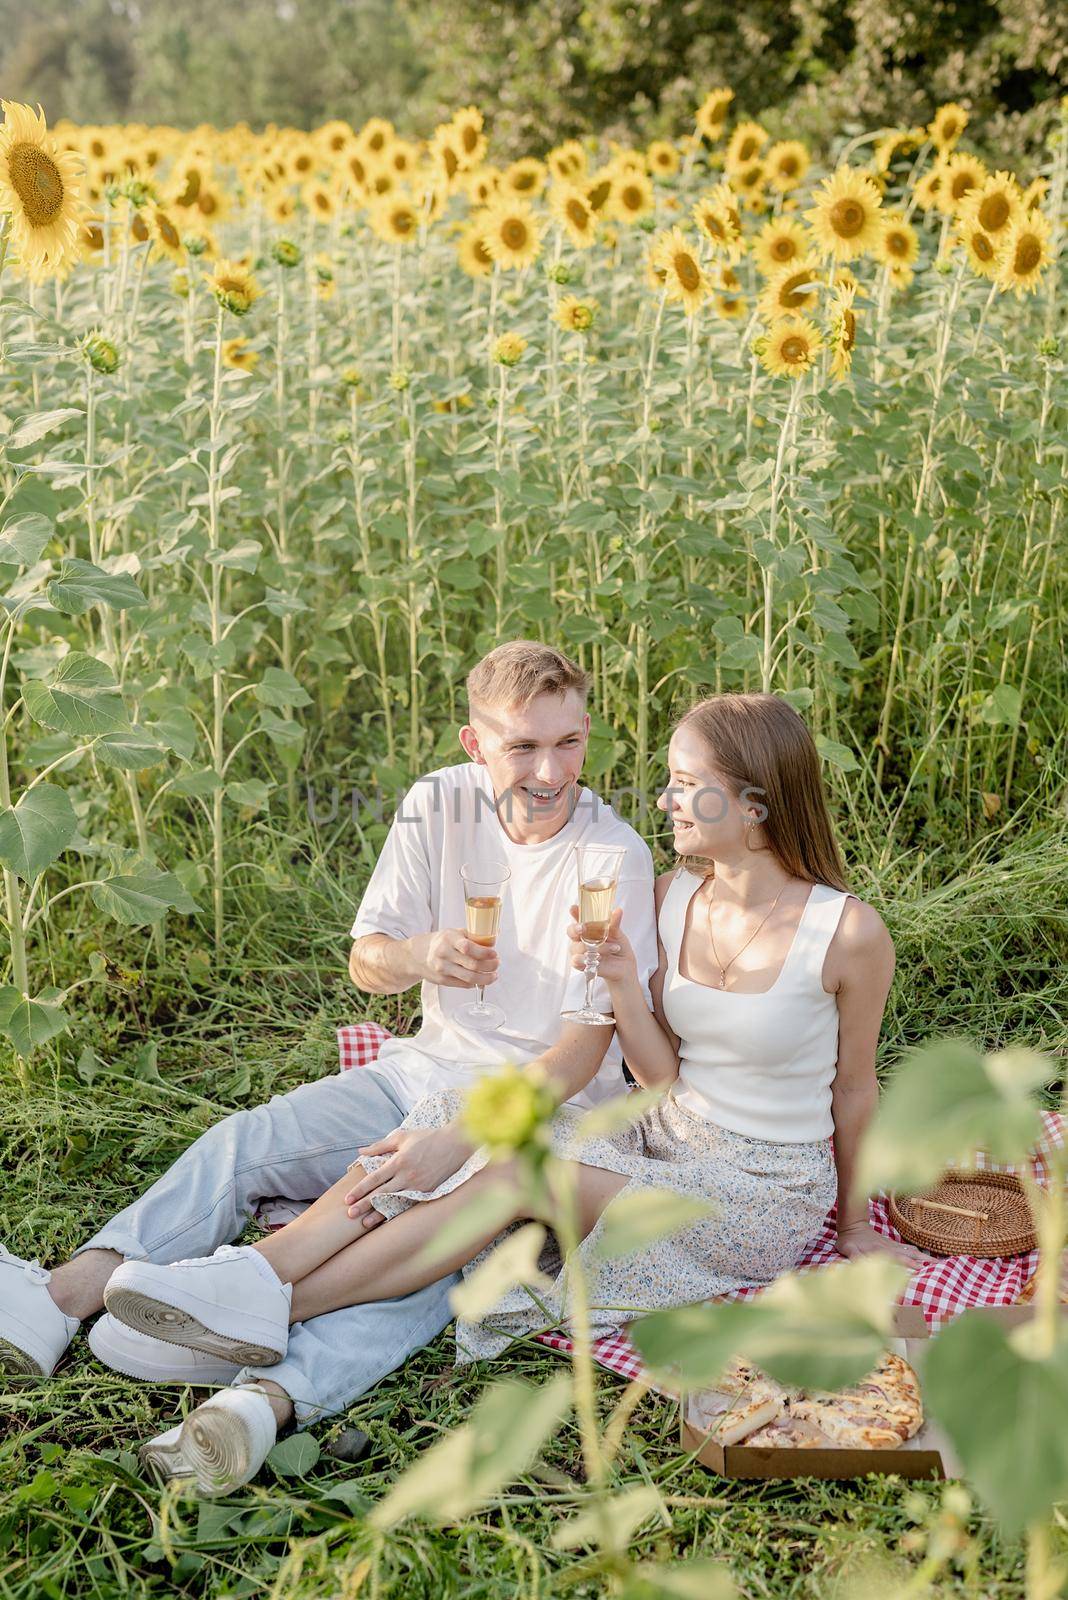 Autumn nature. Fun and liesure. Young teenage couple picnic on sunflower field in sunset drinking champagne